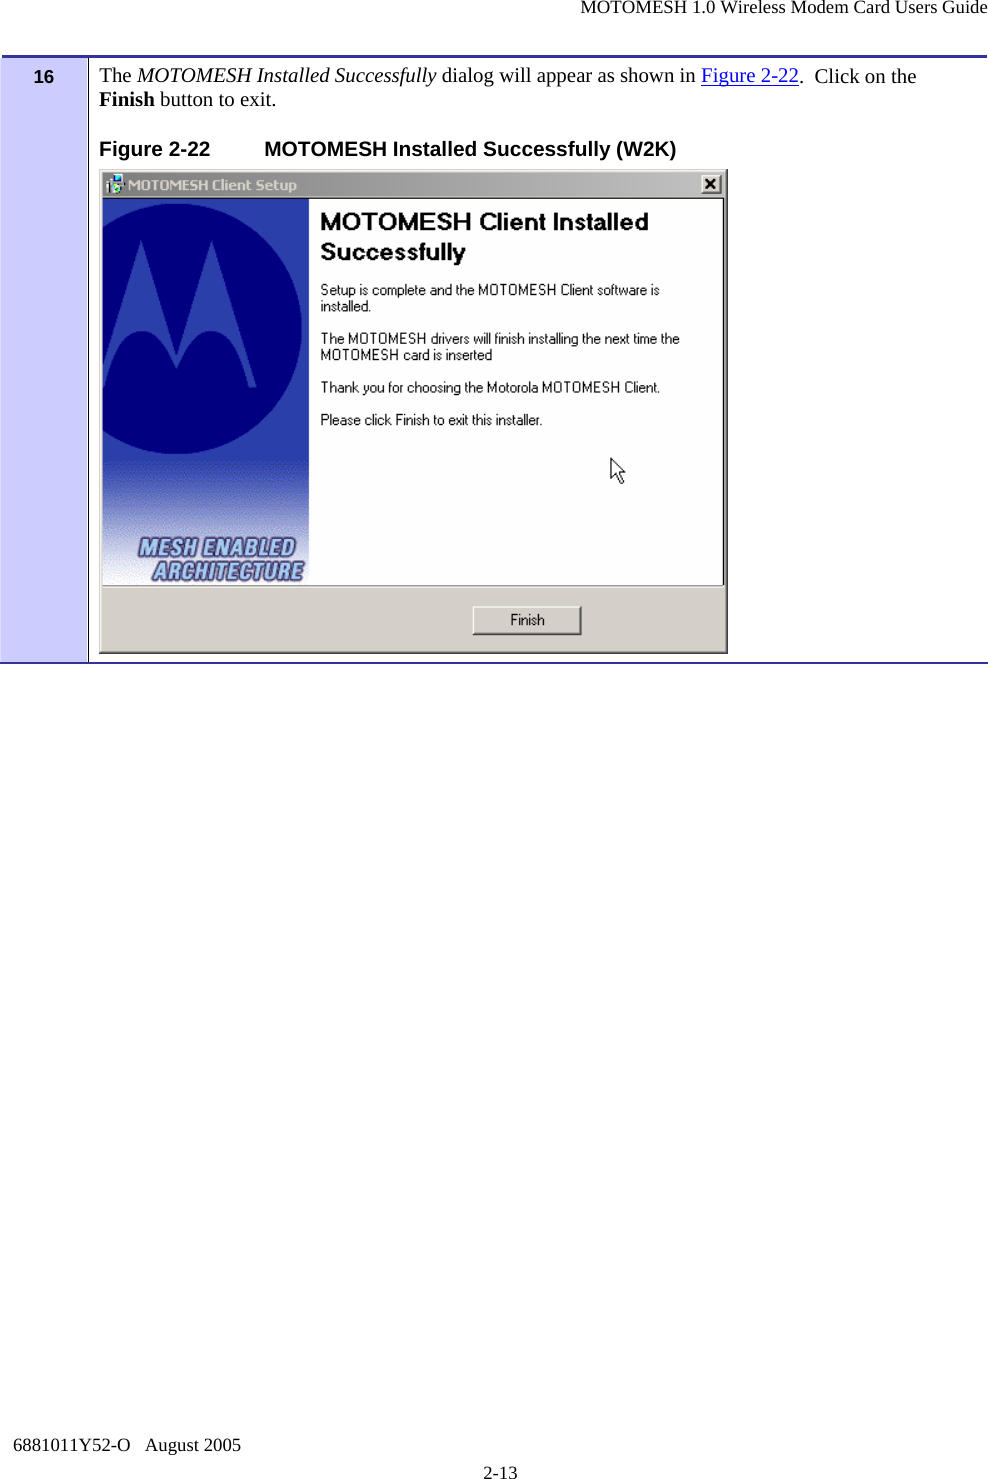 MOTOMESH 1.0 Wireless Modem Card Users Guide 6881011Y52-O   August 2005 2-13 16  The MOTOMESH Installed Successfully dialog will appear as shown in Figure 2-22.  Click on the Finish button to exit. Figure 2-22  MOTOMESH Installed Successfully (W2K)  